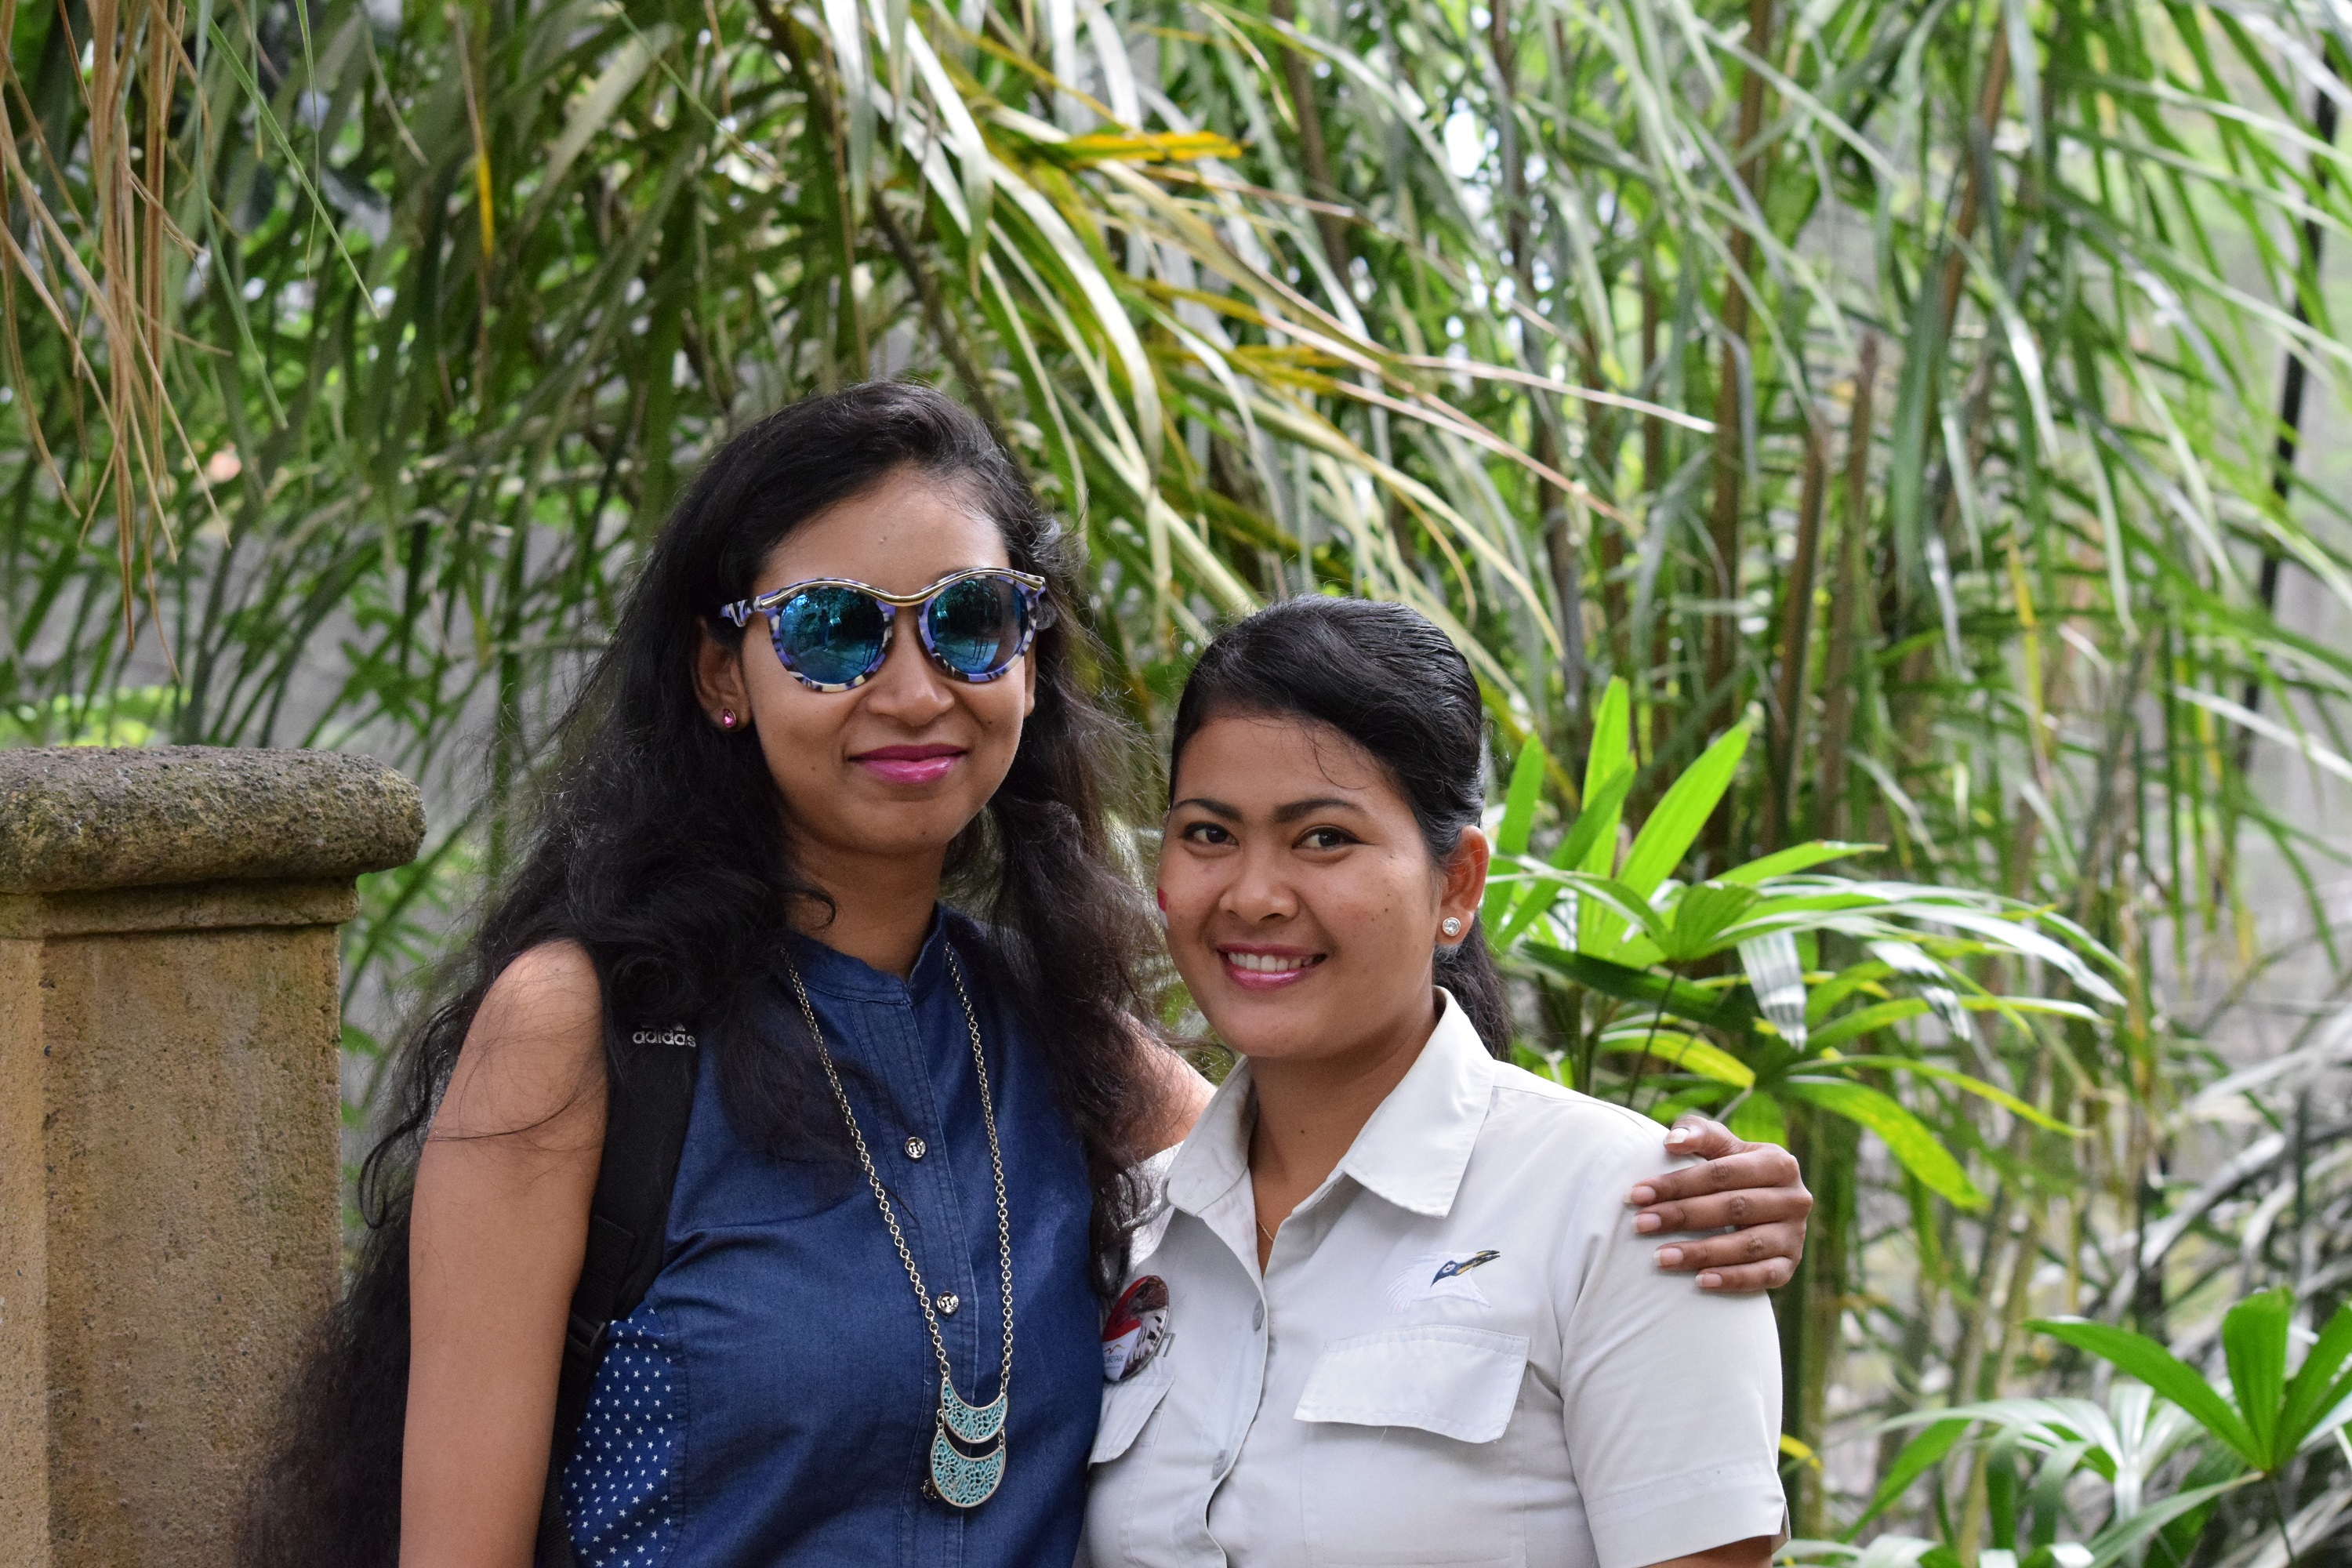  With Shanti, one of the park staff members  